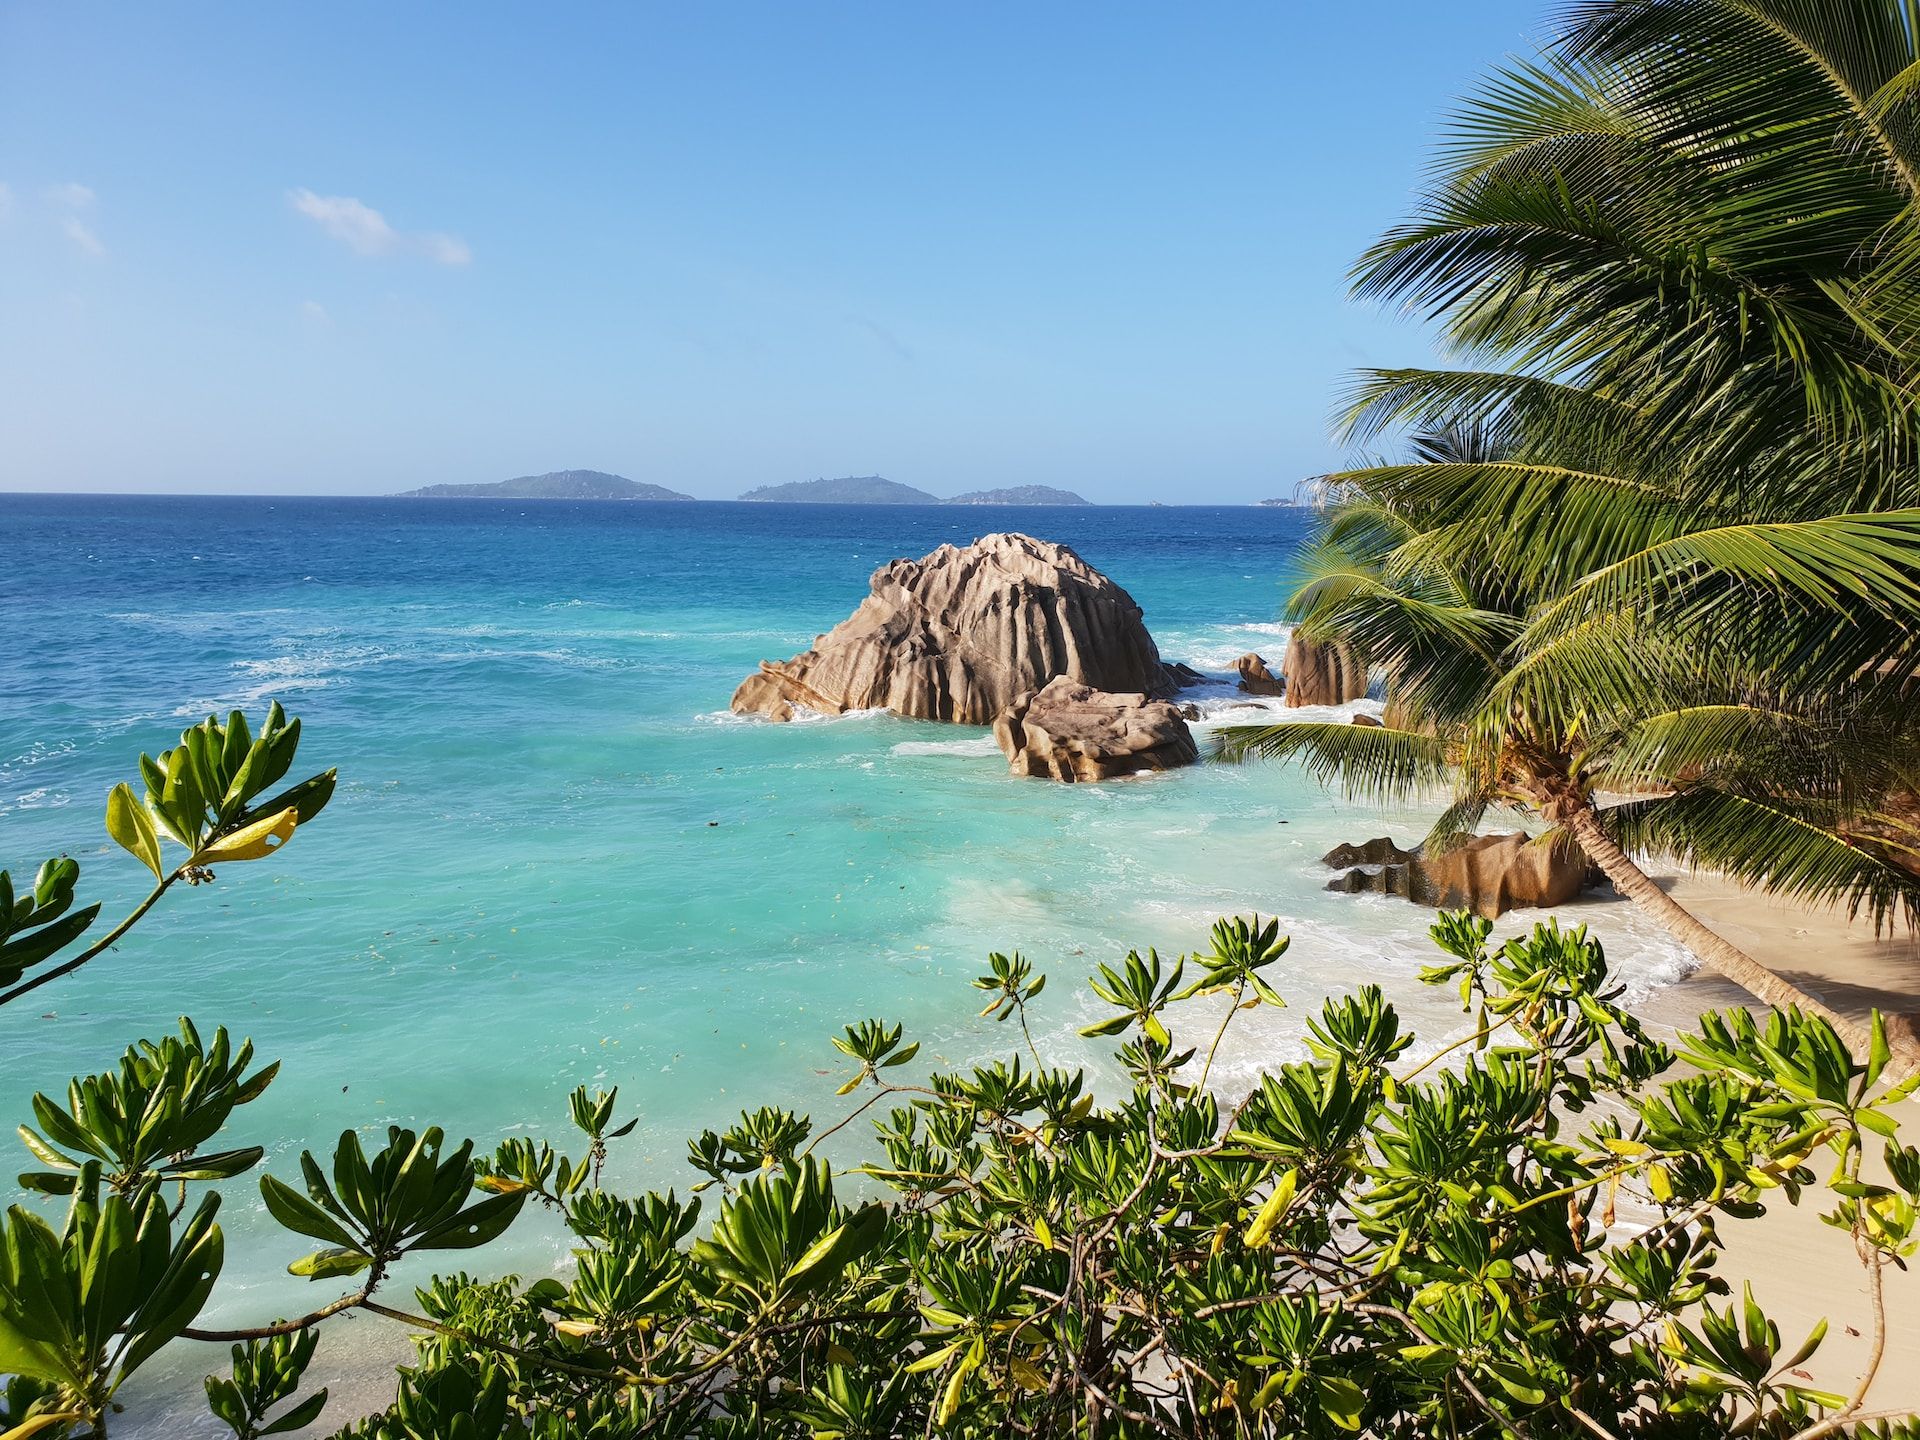 Beautiful island, blue ocean, and green trees in La Digue island in the Seychelles